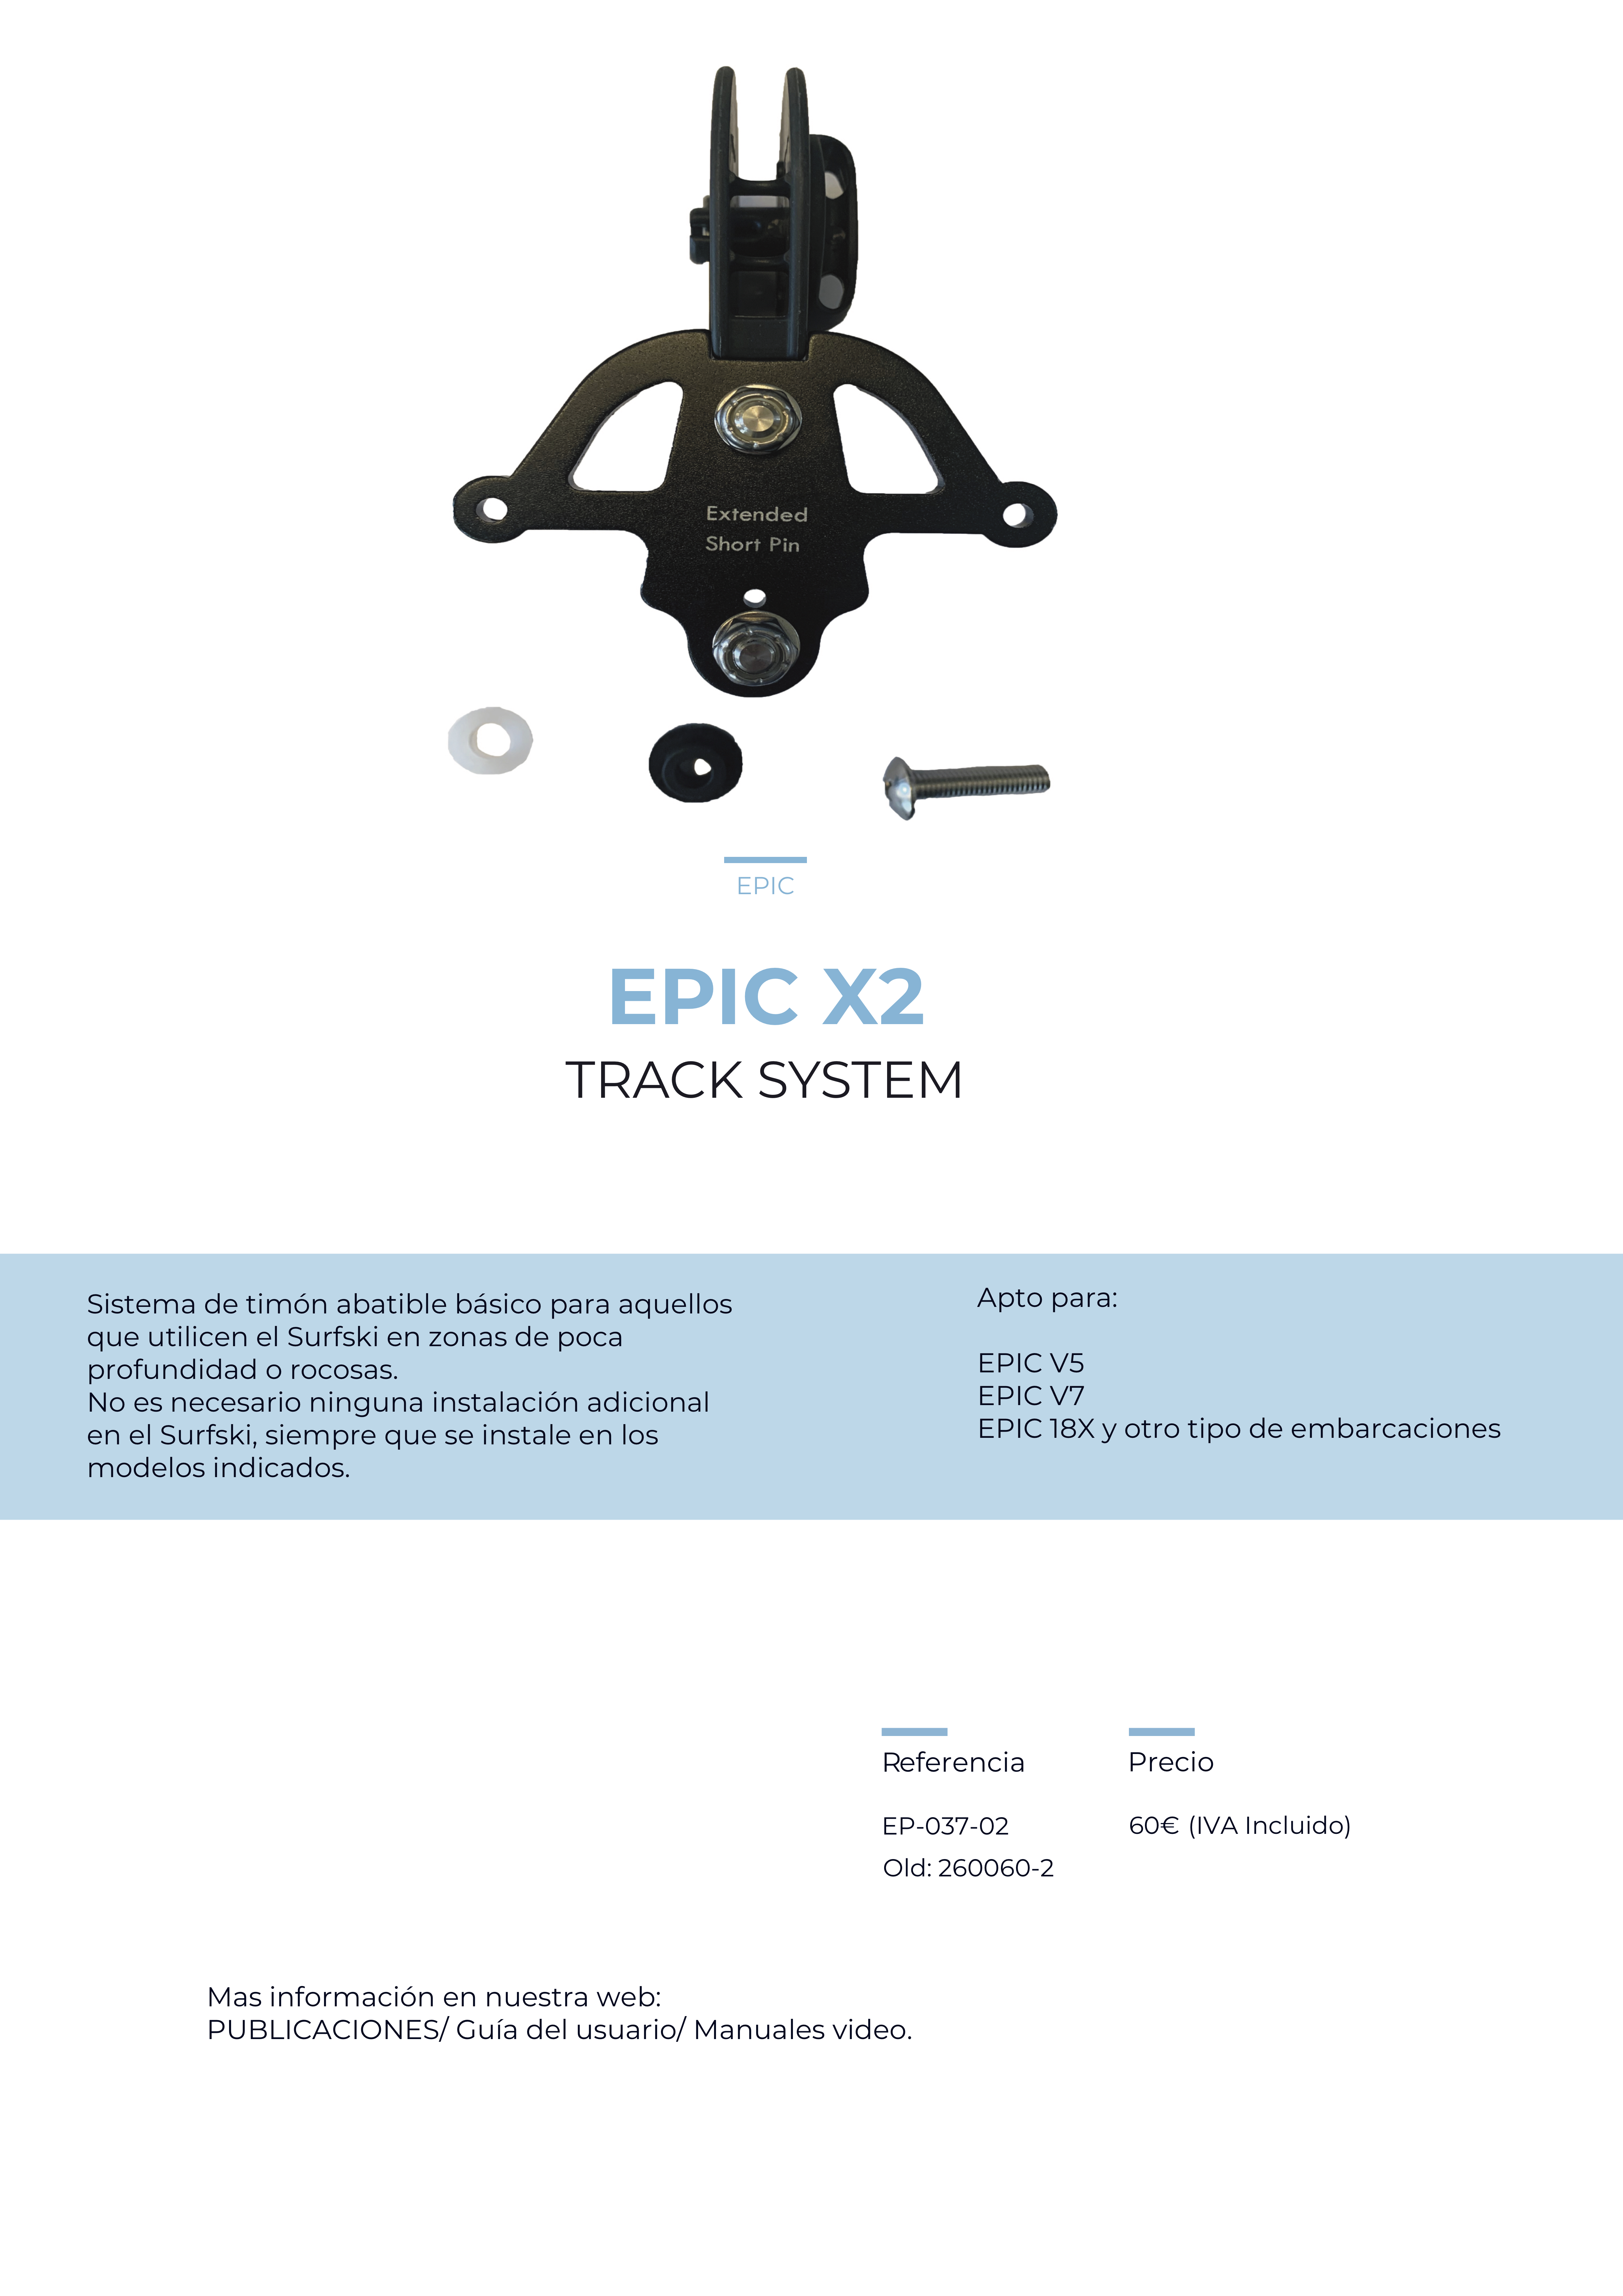 epic X2 track system